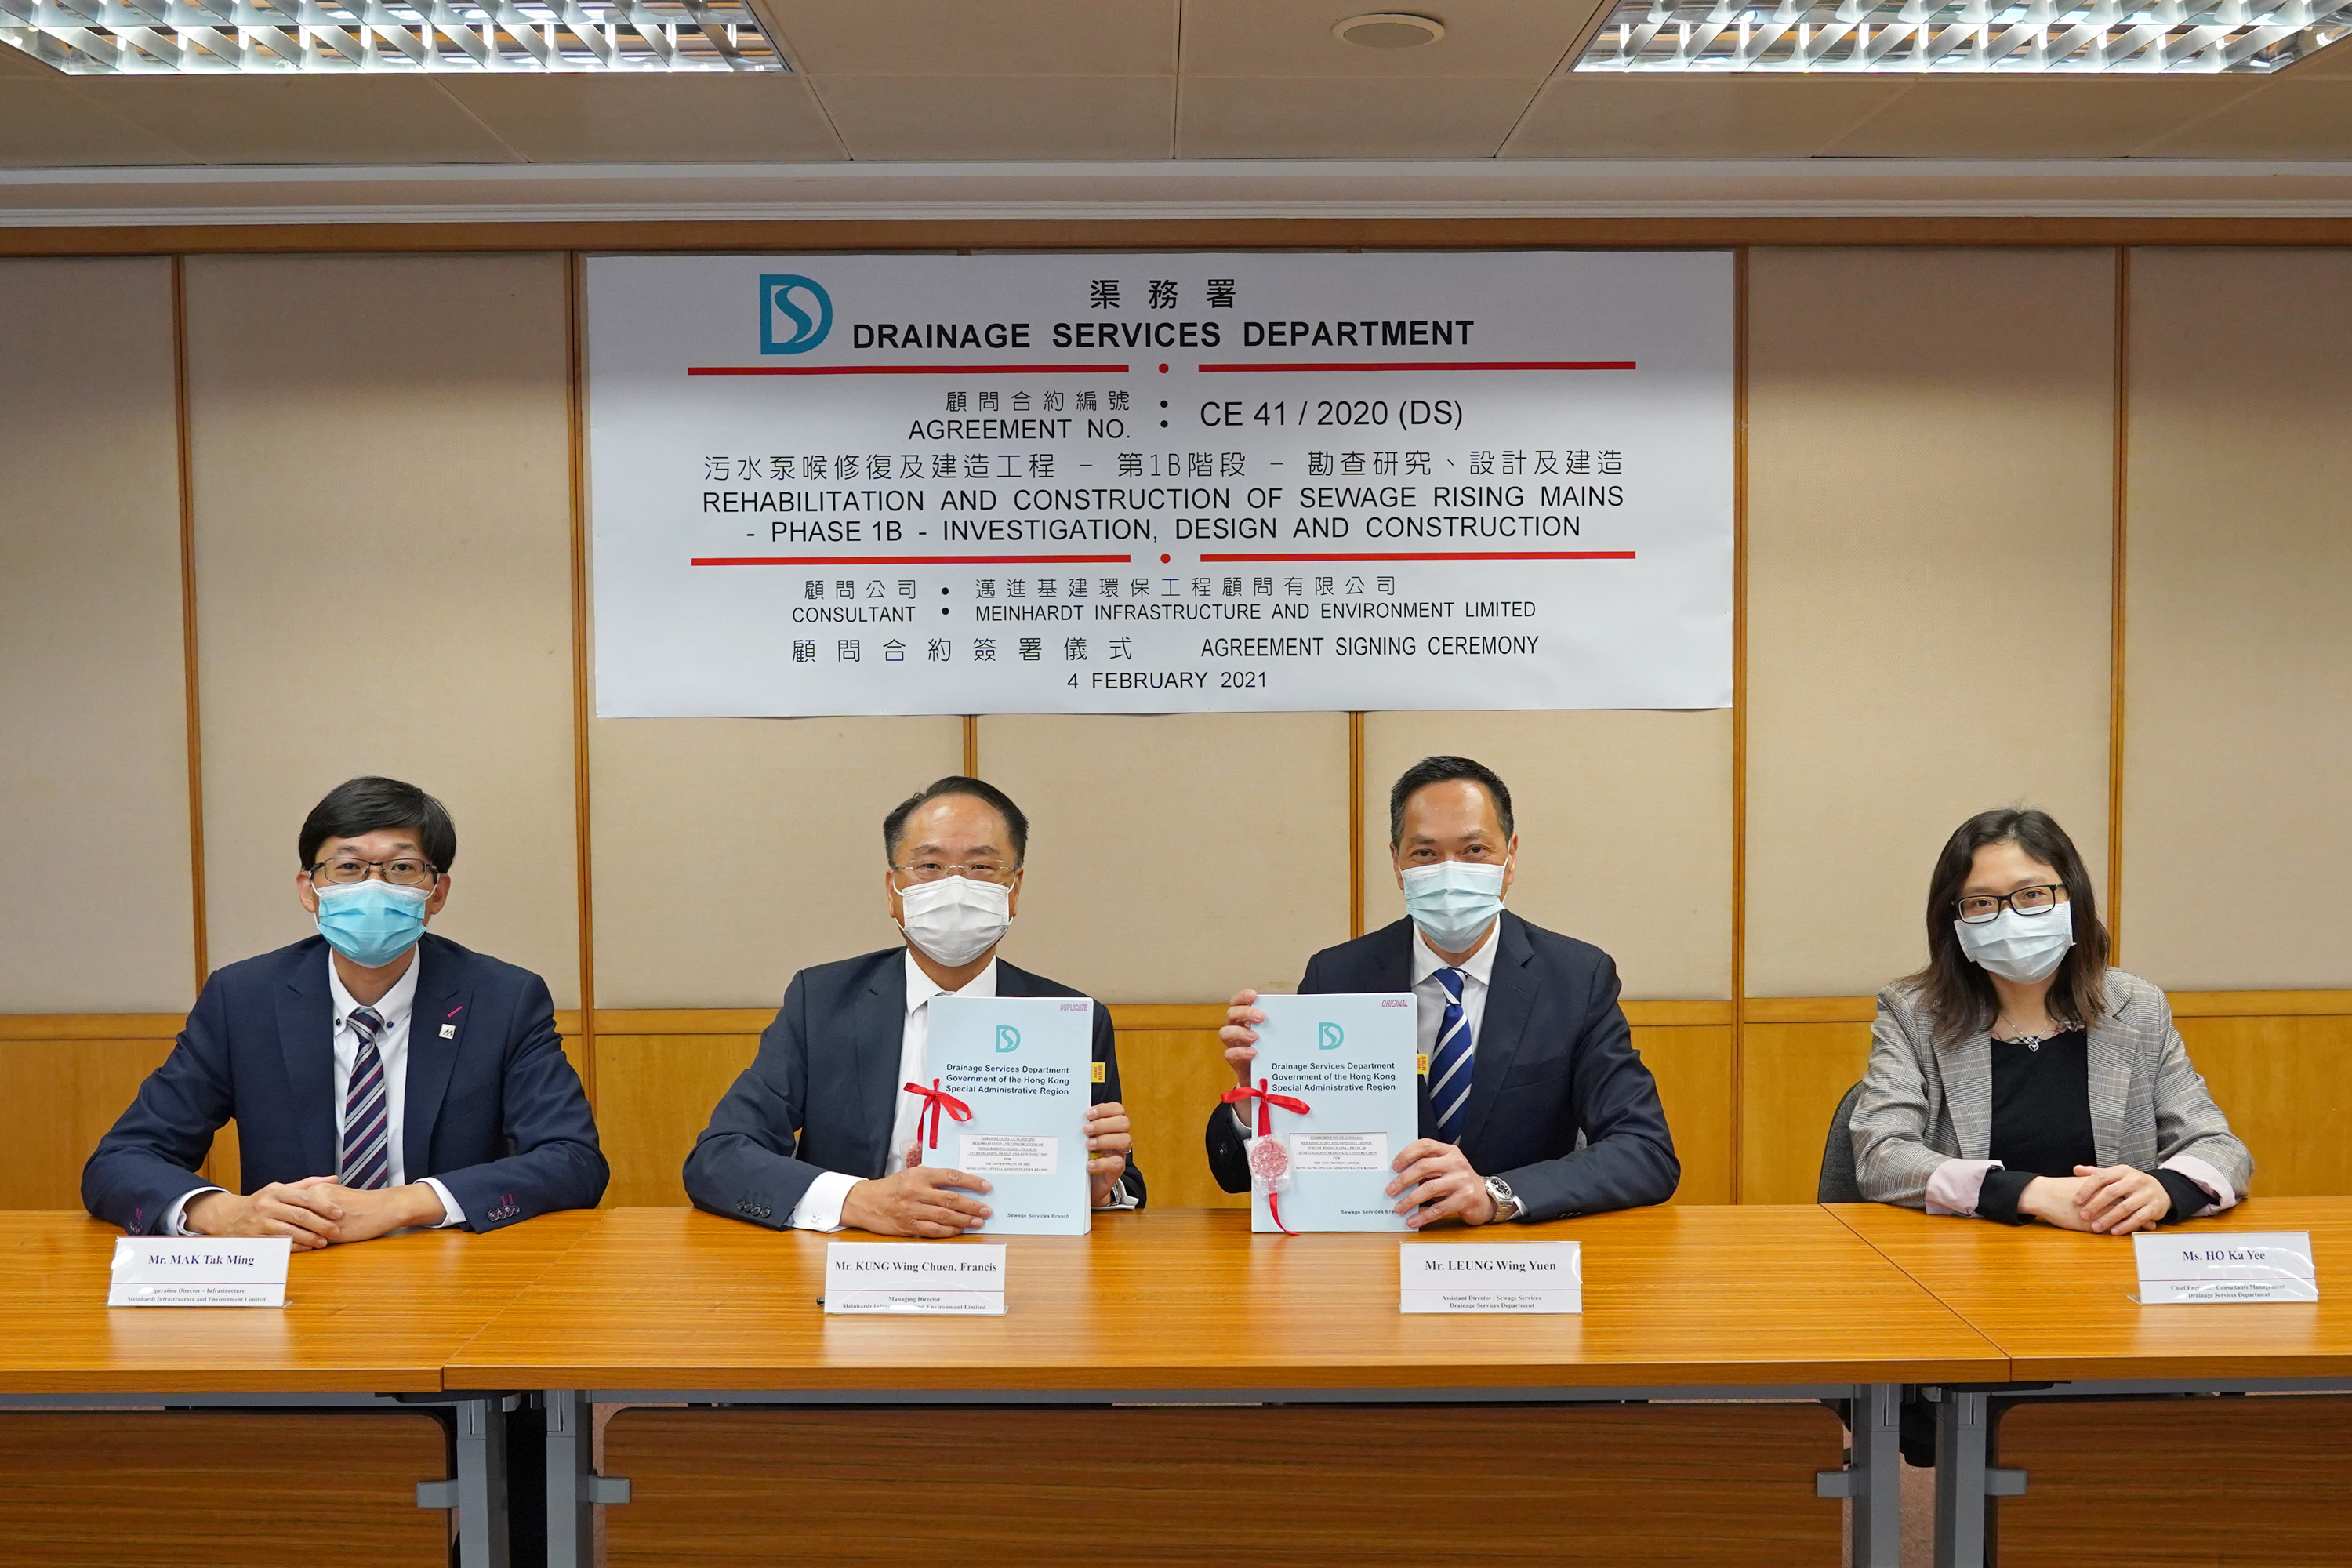 The Assistant Director / Sewage Services of DSD, Mr LEUNG Wing-yuen, Walter (second right) and the Managing Director of Meinhardt Infrastructure and Environment Limited, Mr KUNG Wing-chuen, Francis (second left), attended the Agreement Signing Ceremony